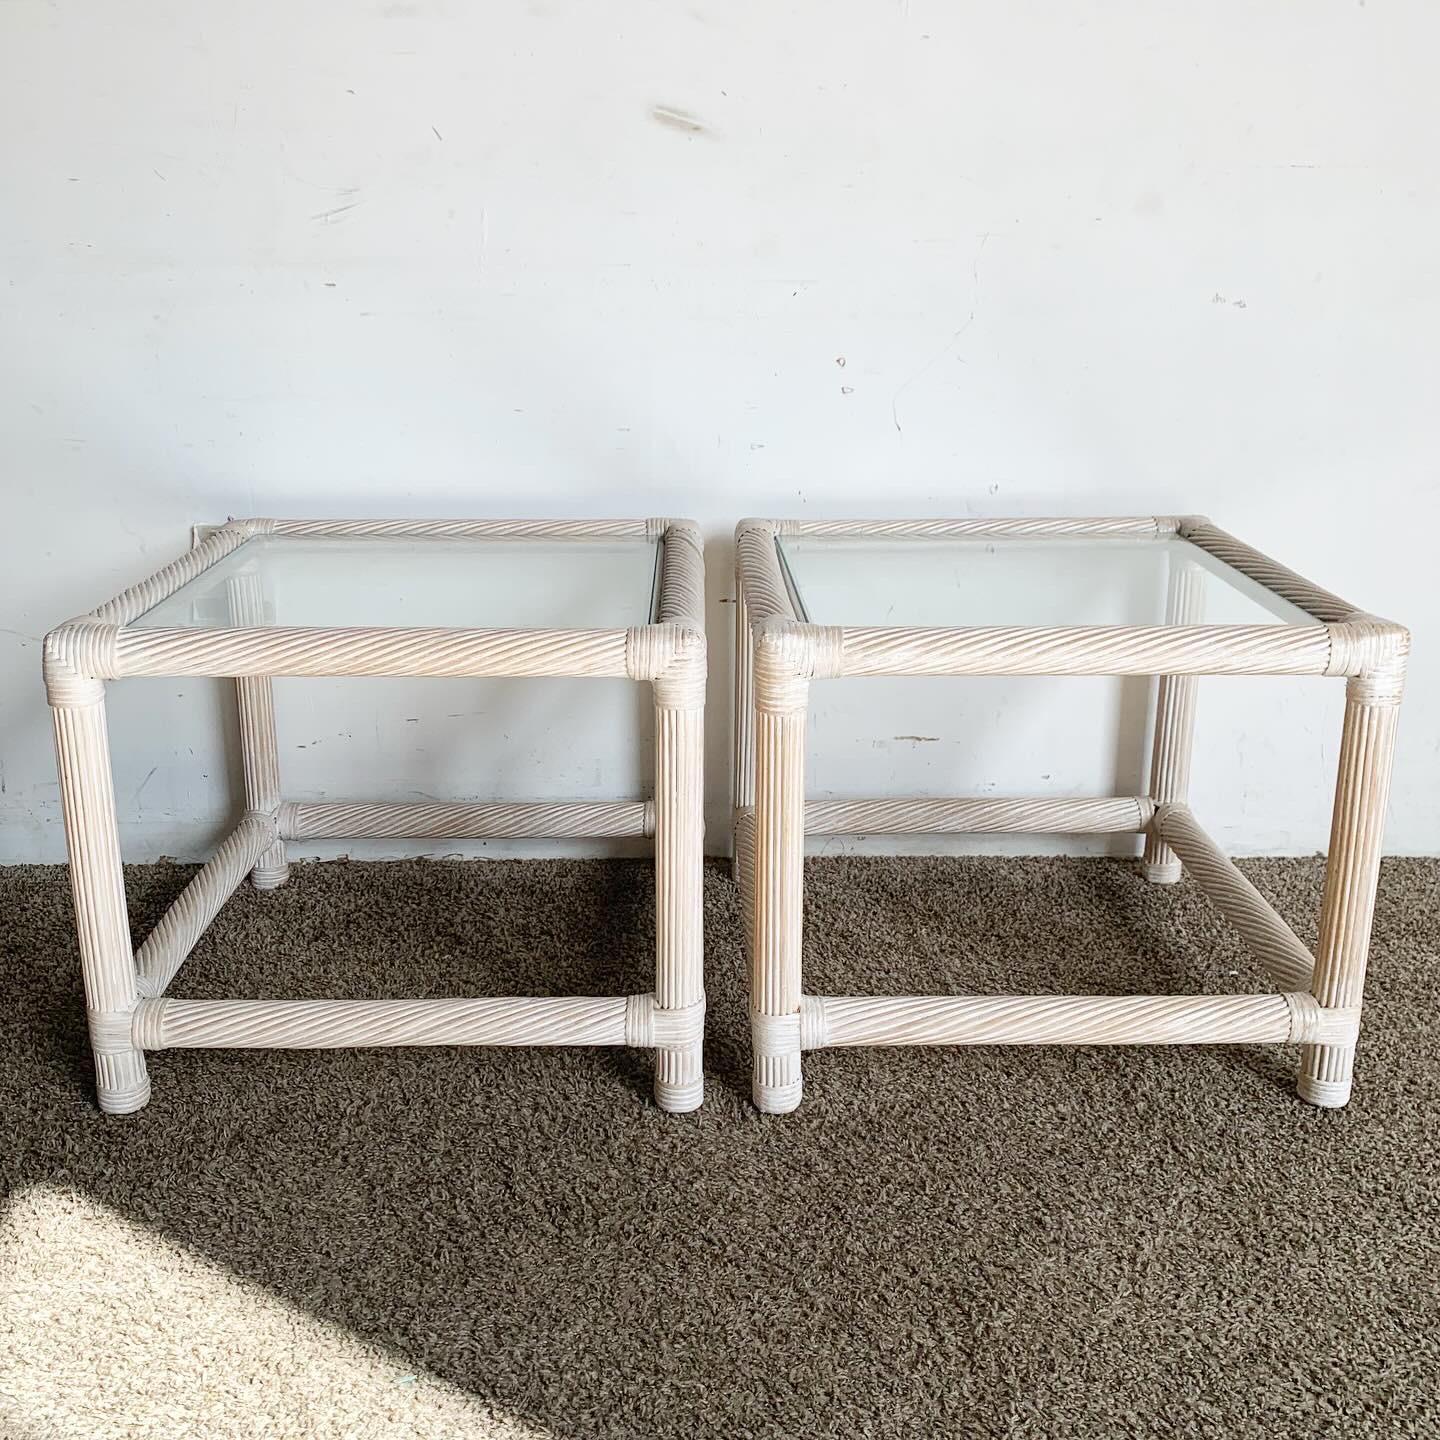 Philippine Boho Chic Twisted Pencil Reed and Rattan Side Tables - a Pair For Sale